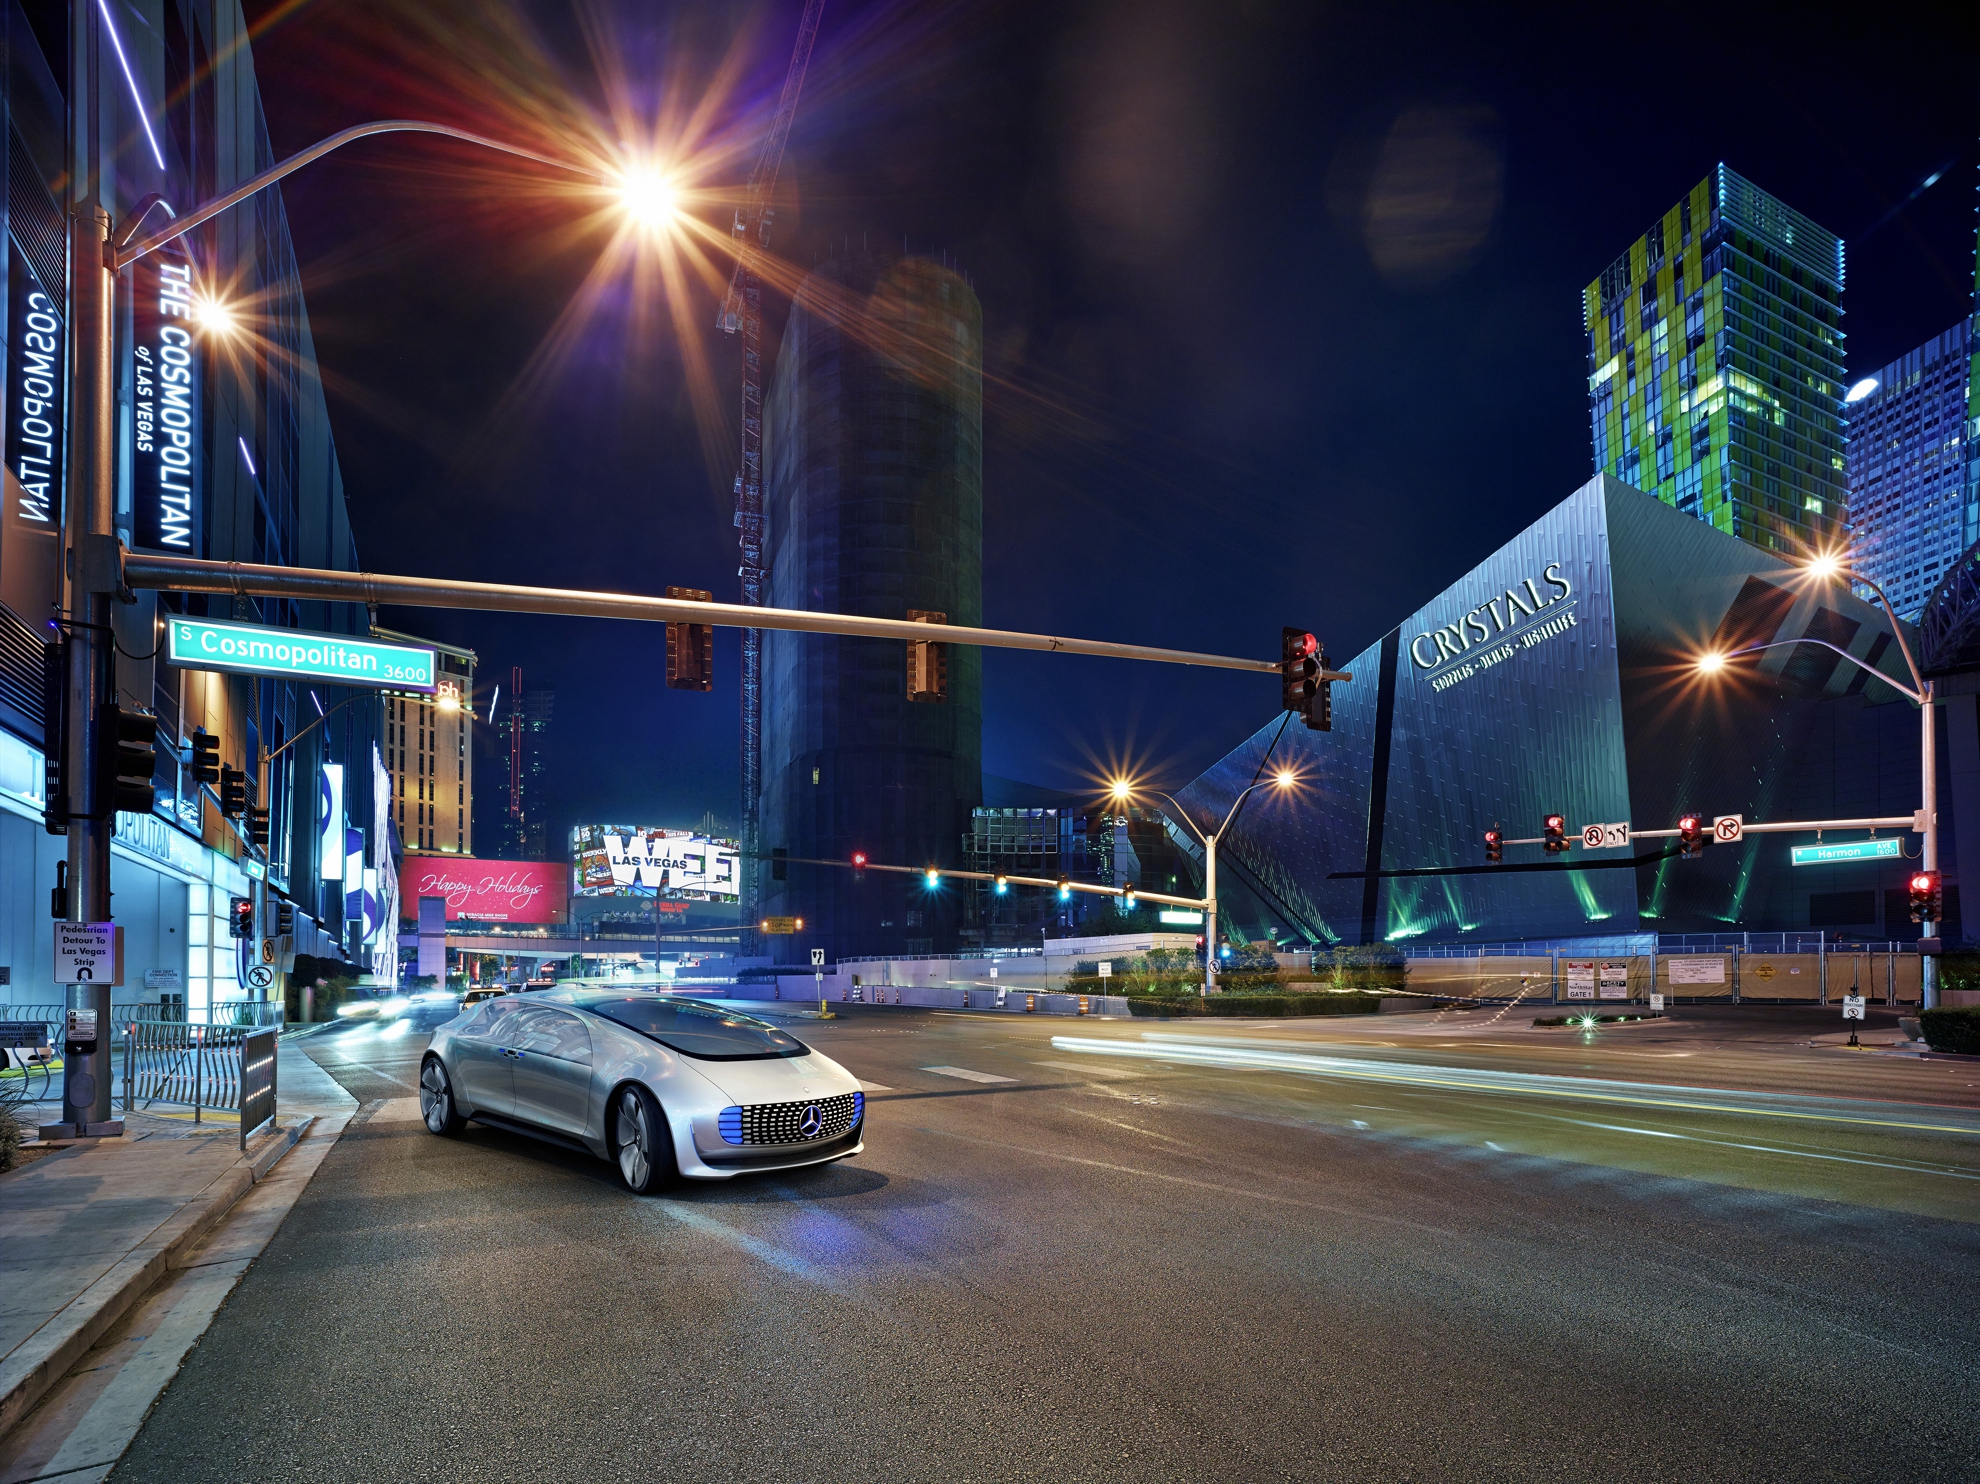 World premiere of the Mercedes-Benz F 015 Luxury in Motion at the CES: Revolution of Mobility